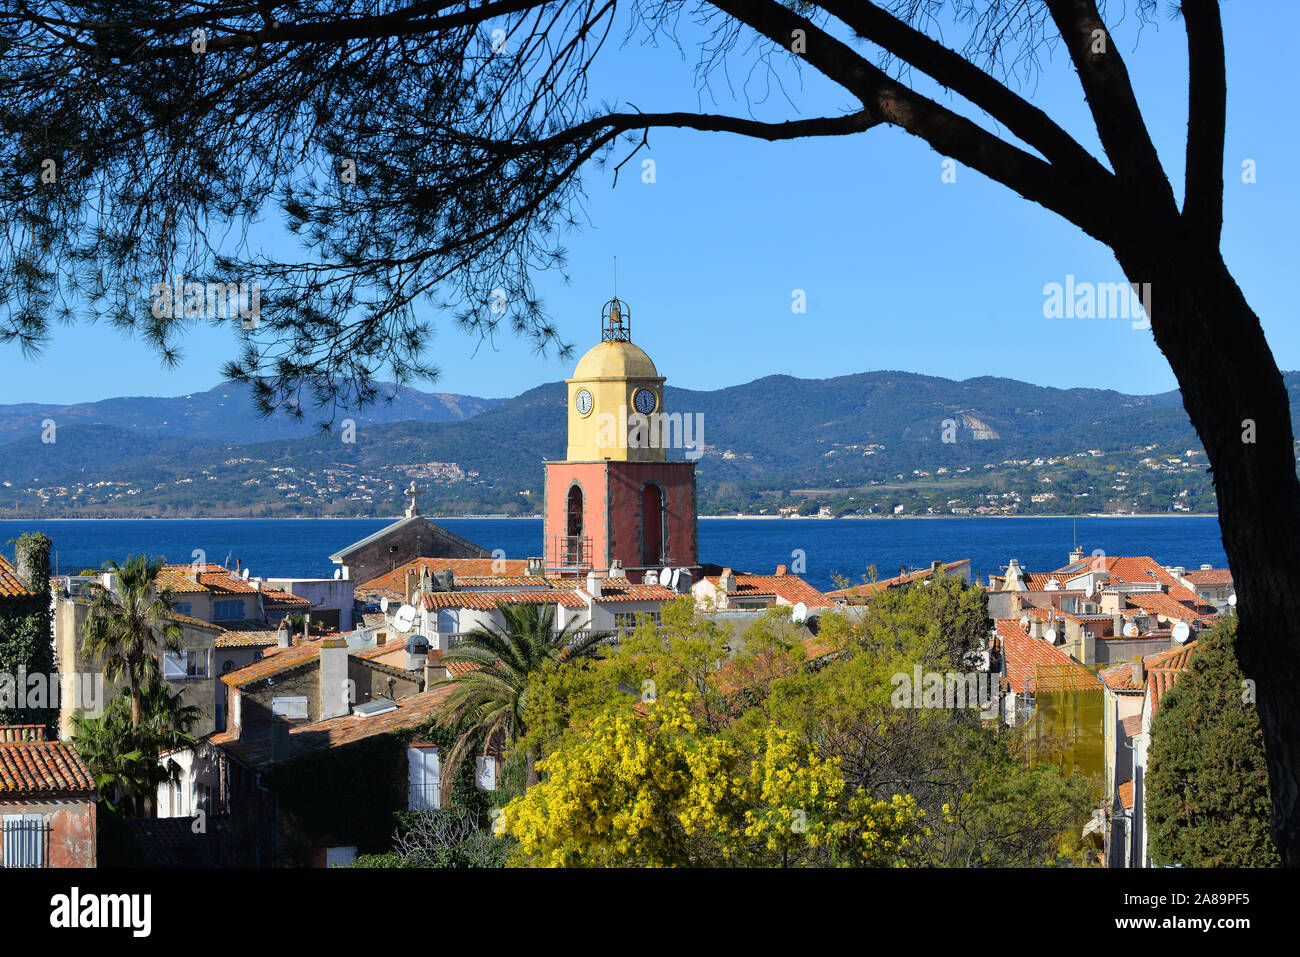 St Tropez and the colored tower bell Stock Photo - Alamy